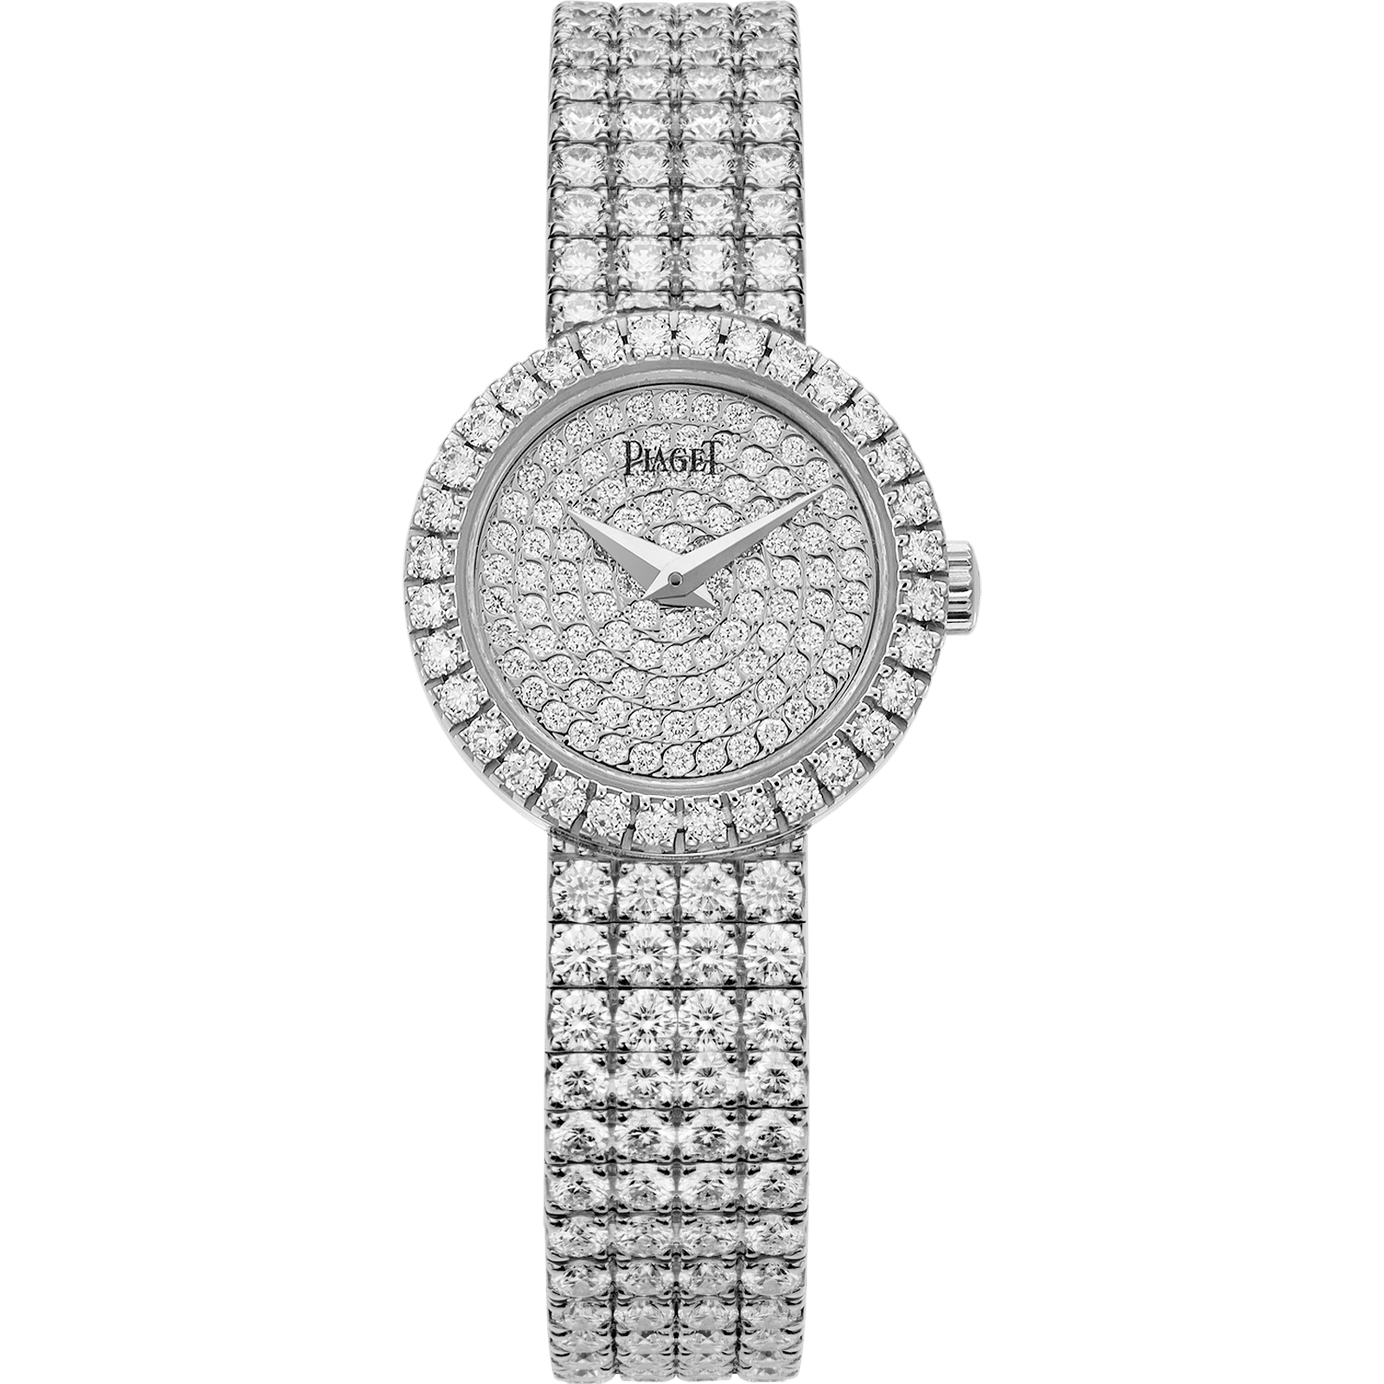 Renani Jewels sets Guinness World Record for most diamonds set on a watch